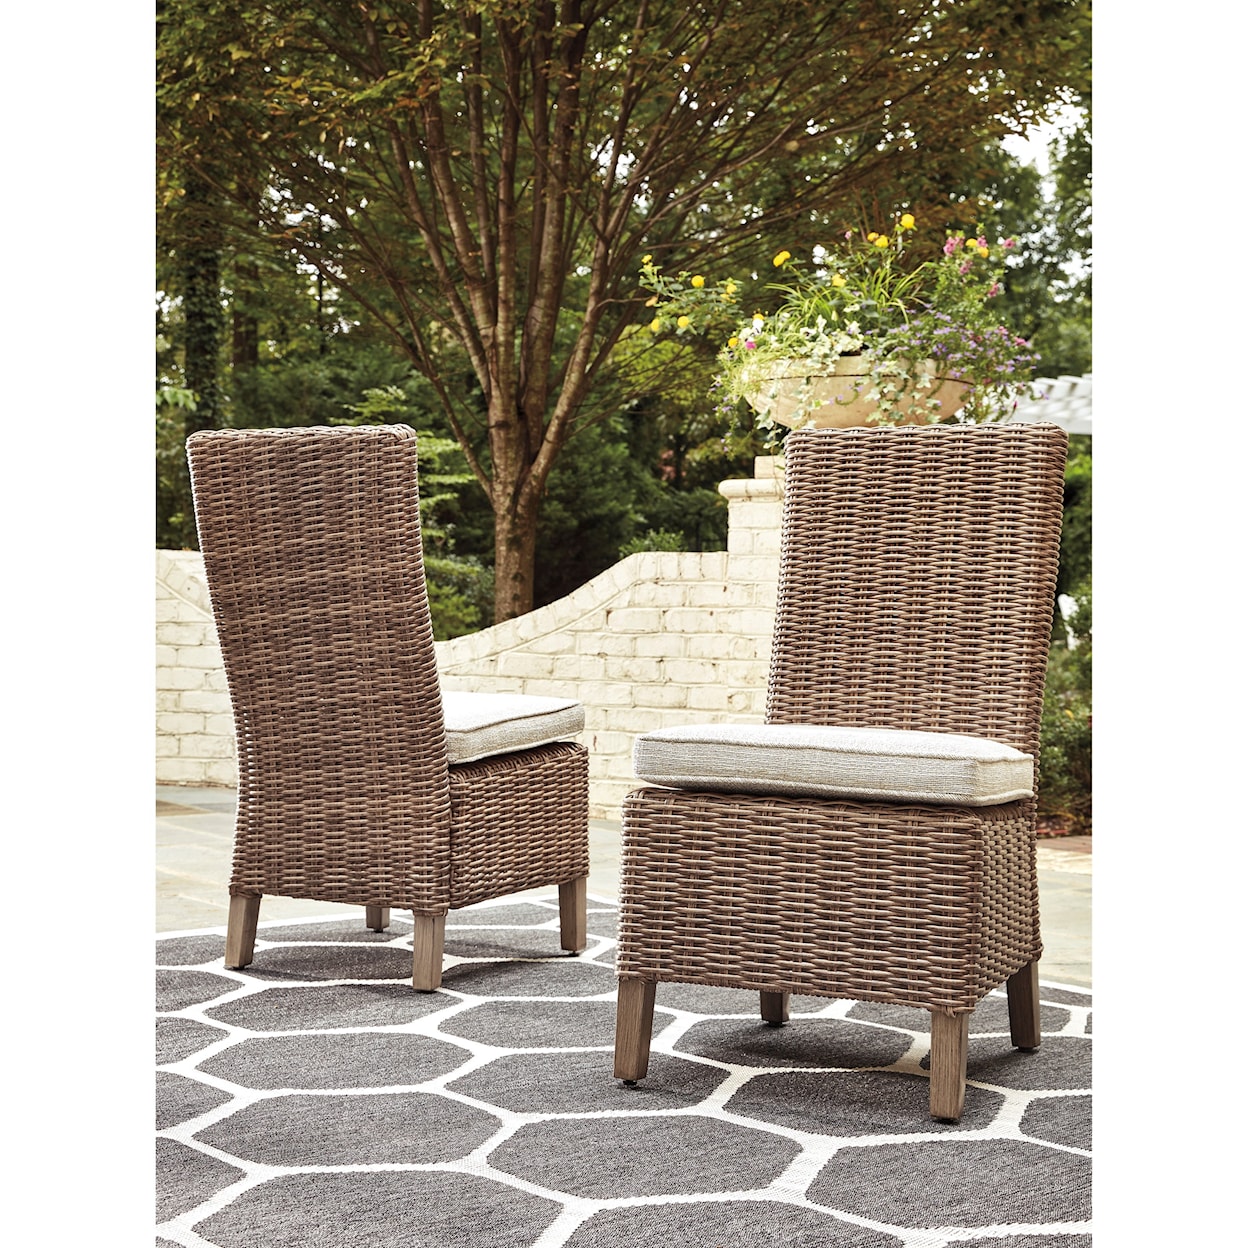 Signature Design by Ashley Beachcroft Set of 2 Side Chairs with Cushion